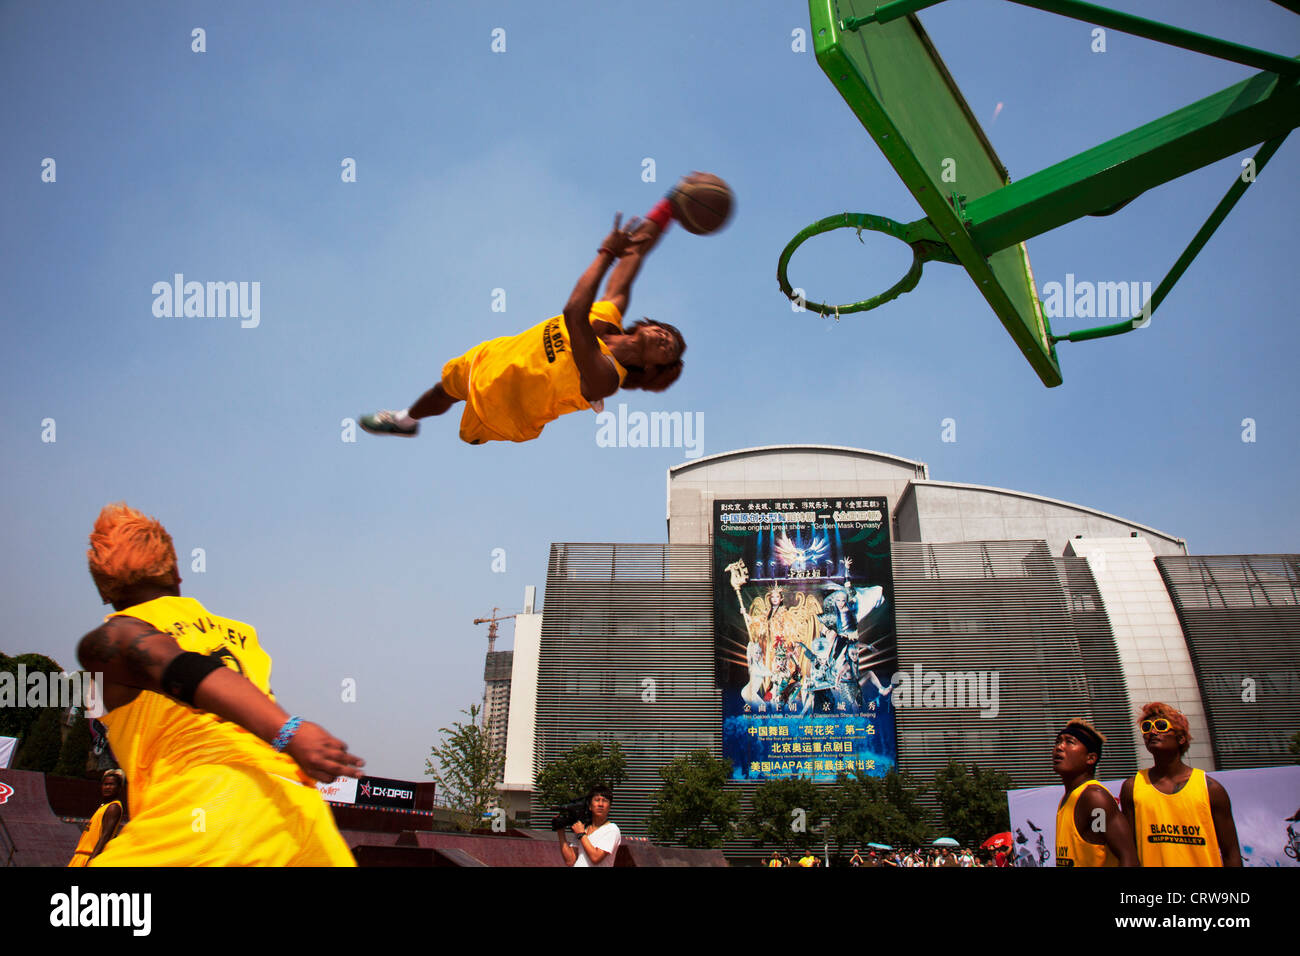 Basketball tricks team perform their slam dunk trick, flying through the air at Happy Valley amusements park, Beijing, China. Stock Photo